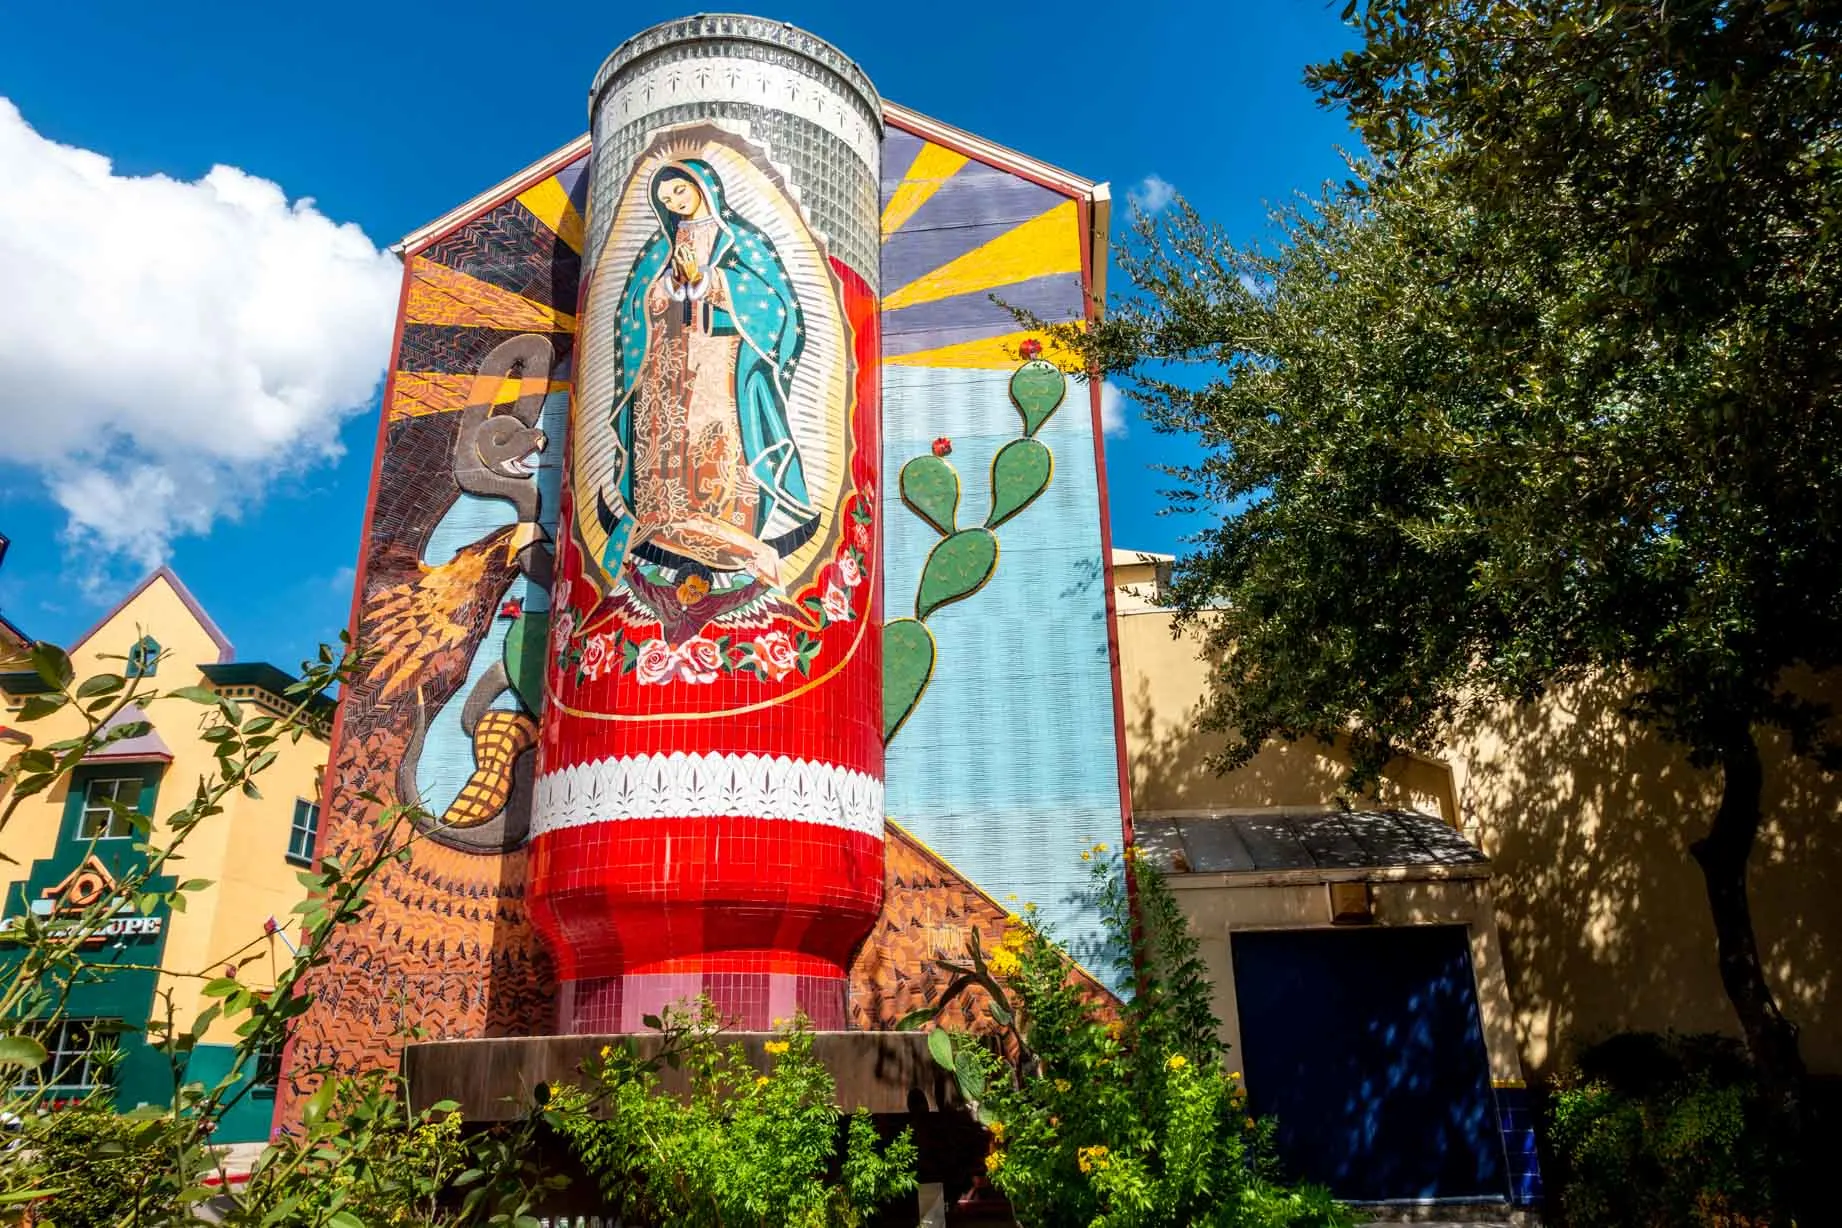 Giant Catholic prayer candle with the image of the Virgin Mary.